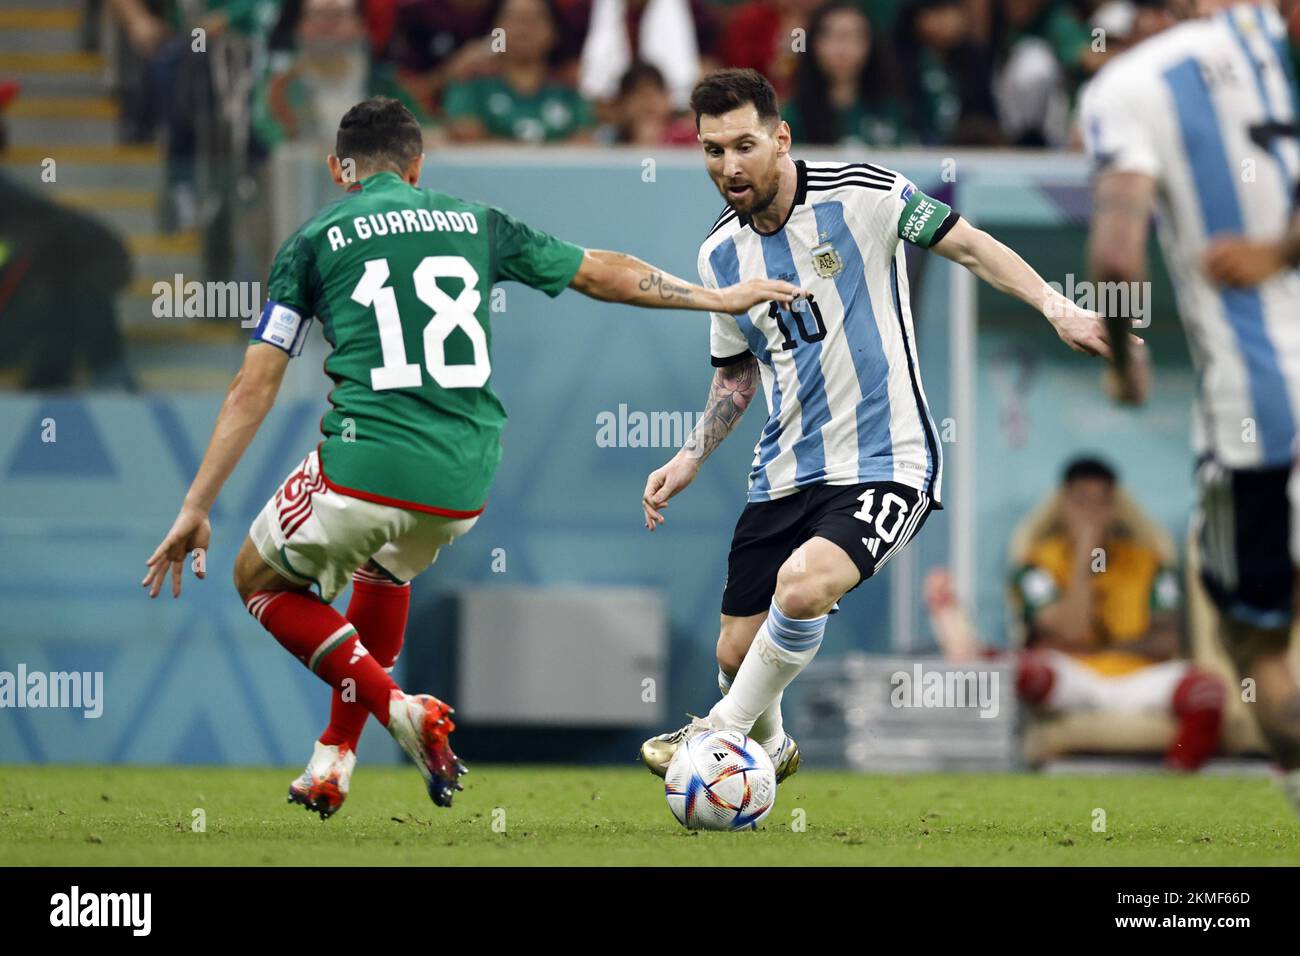 LUSAIL CITY - (l-r) Andres Guardado of Mexico, Lionel Messi of Argentina during the FIFA World Cup Qatar 2022 group C match between Argentina and Mexico at Lusail Stadium on November 26, 2022 in Lusail City, Qatar. AP | Dutch Height | MAURICE OF STONE Stock Photo